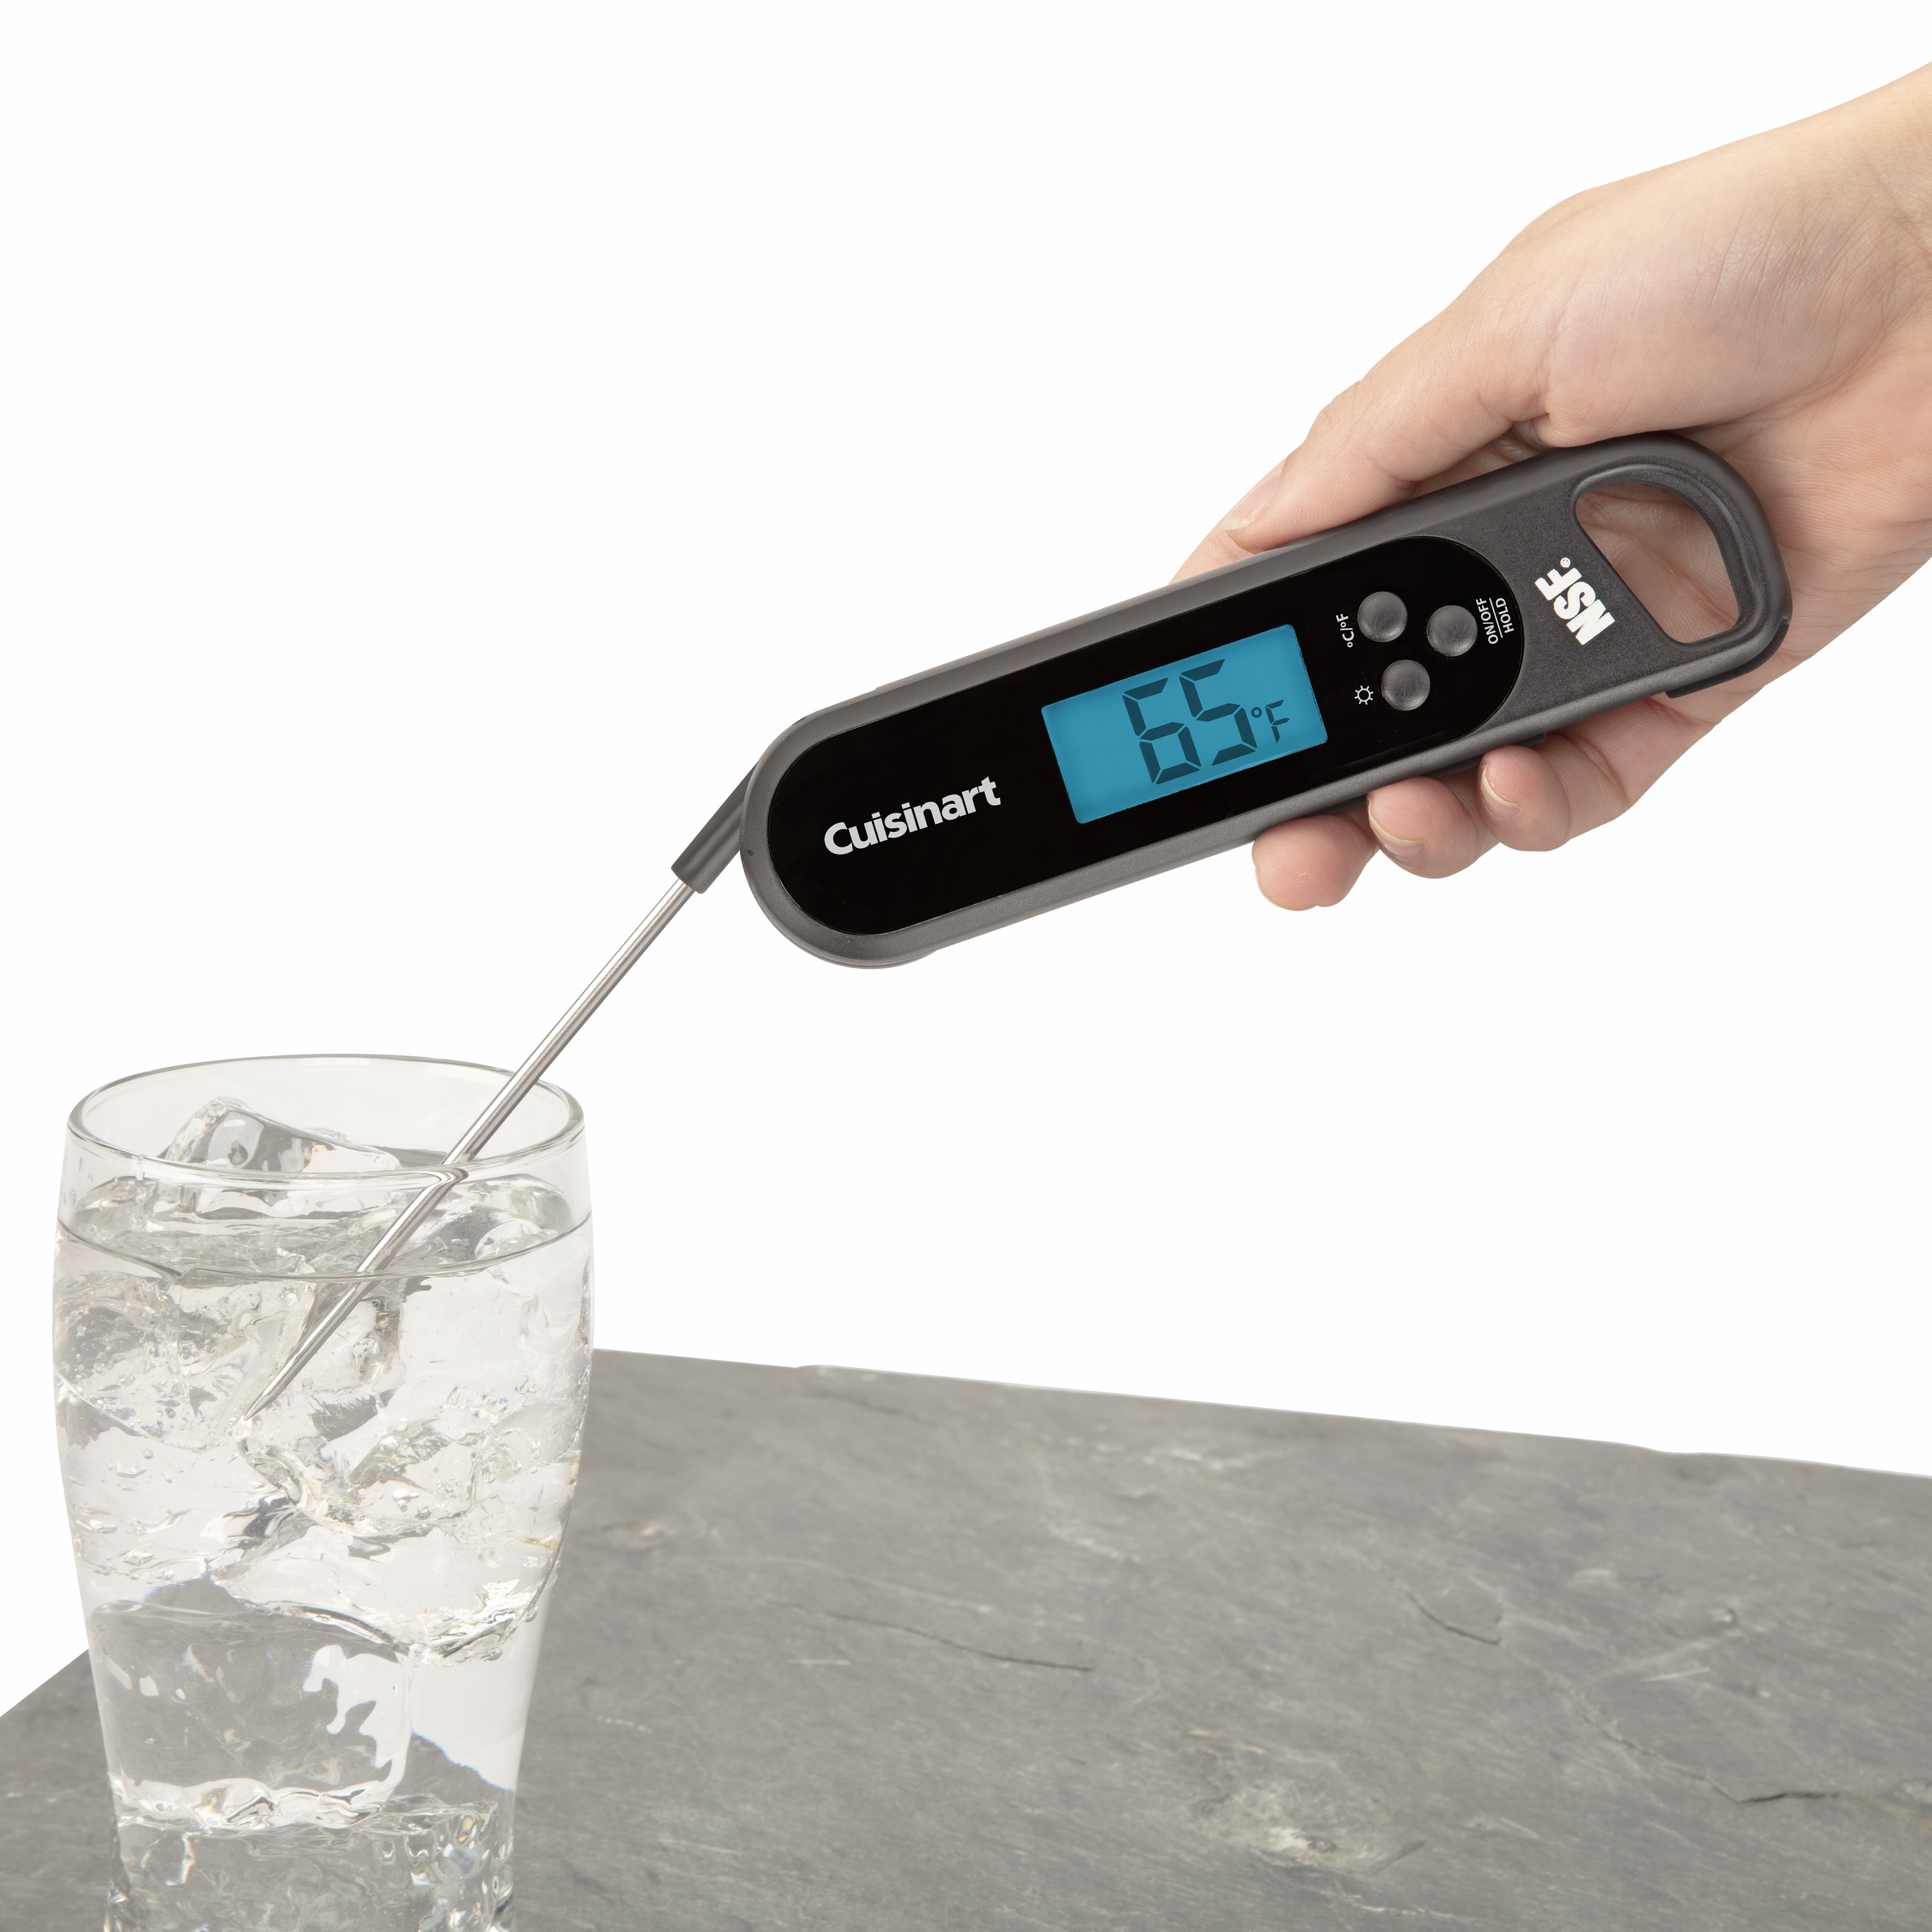 Cuisinart Quick Read Folding Grilling Thermometer